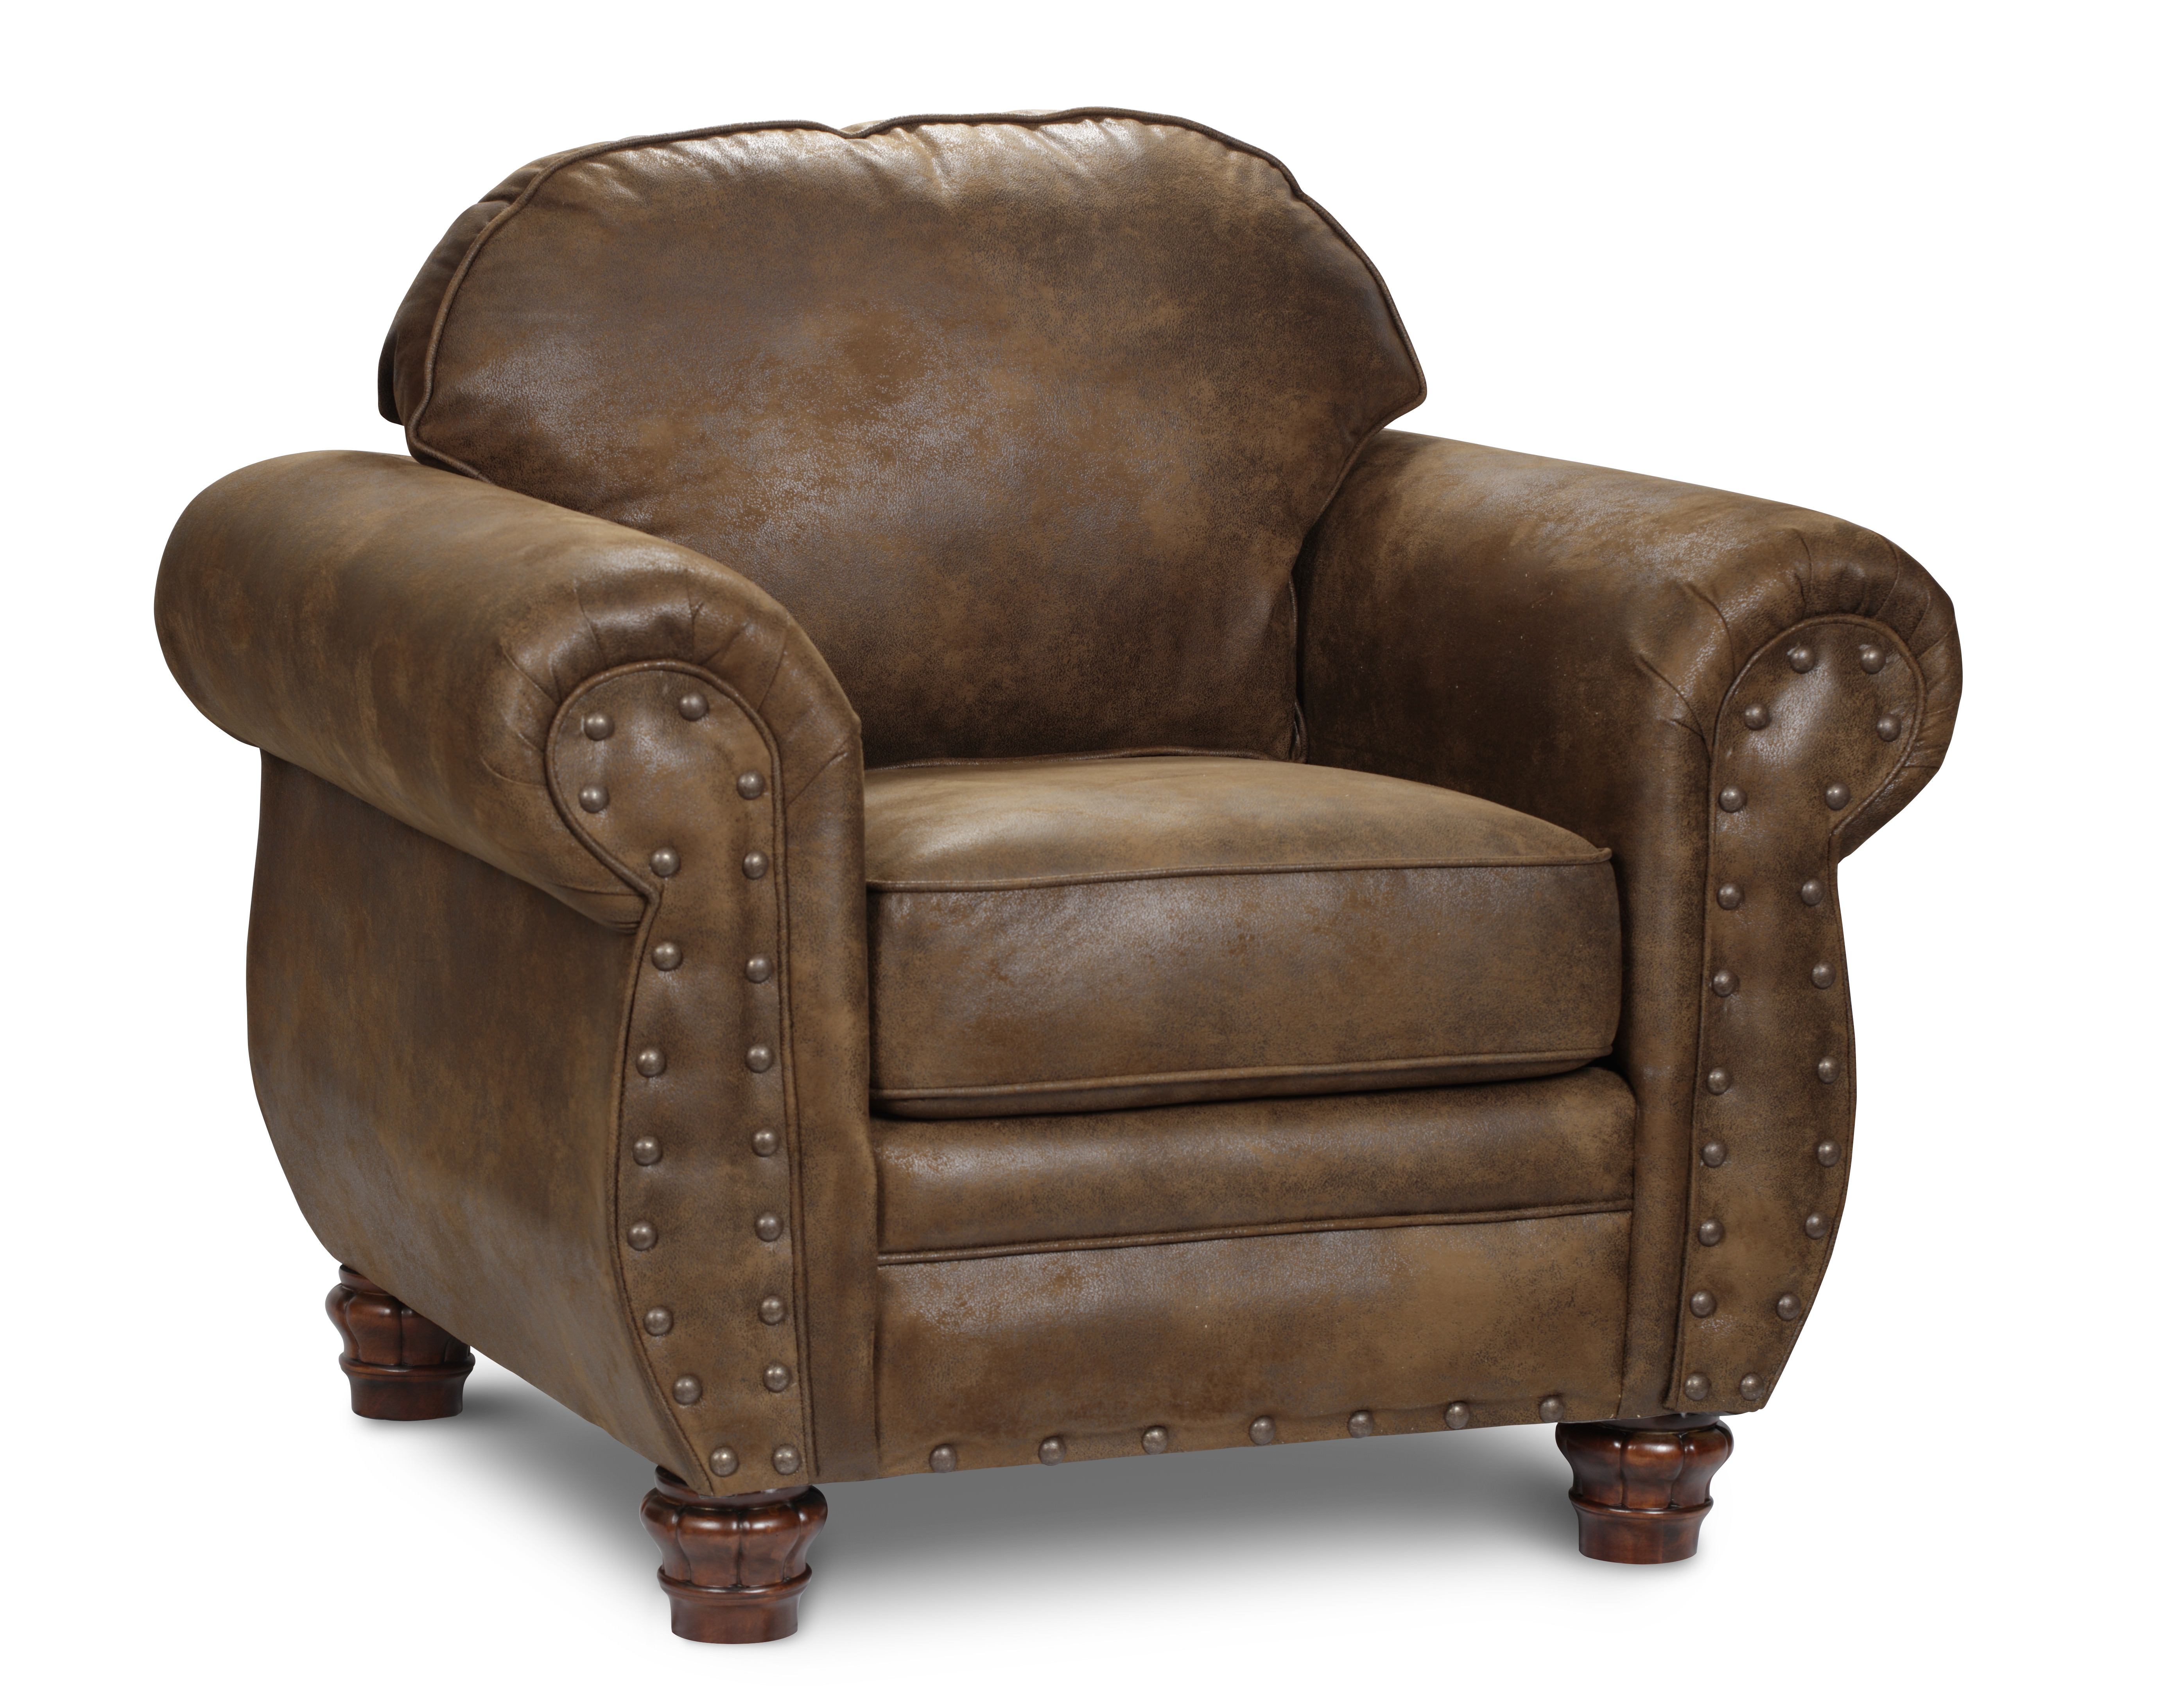 Picture of American Furniture Classics 99011-90 Sedona Arm Chair - 37 x 44 x 36 in.